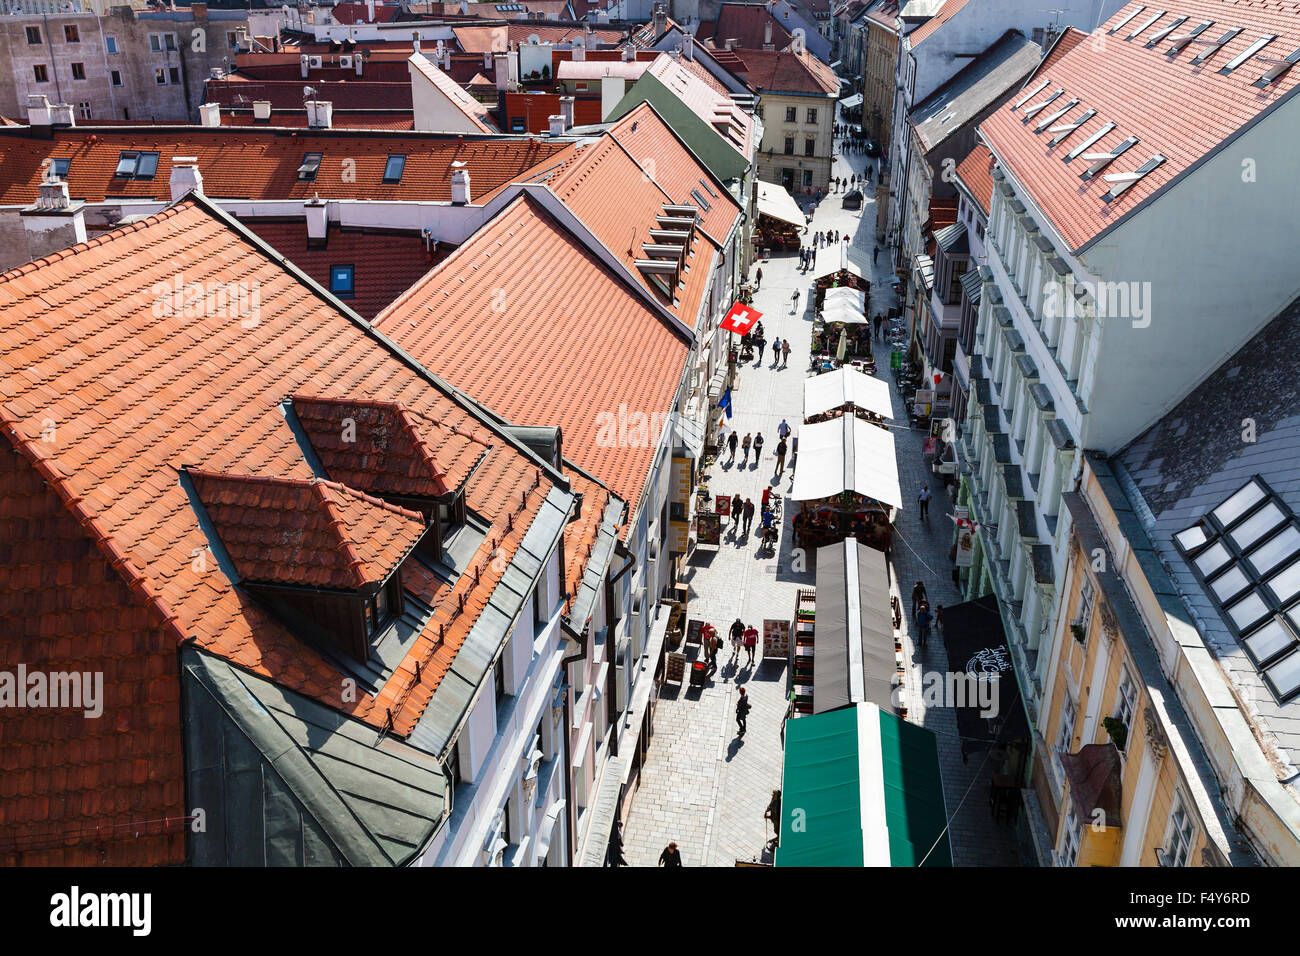 BRATISLAVA, SLOVAKIA - SEPTEMBER 23, 2015: above view of Michalska street with restaurants and tourists in Bratislava. In Middle Stock Photo